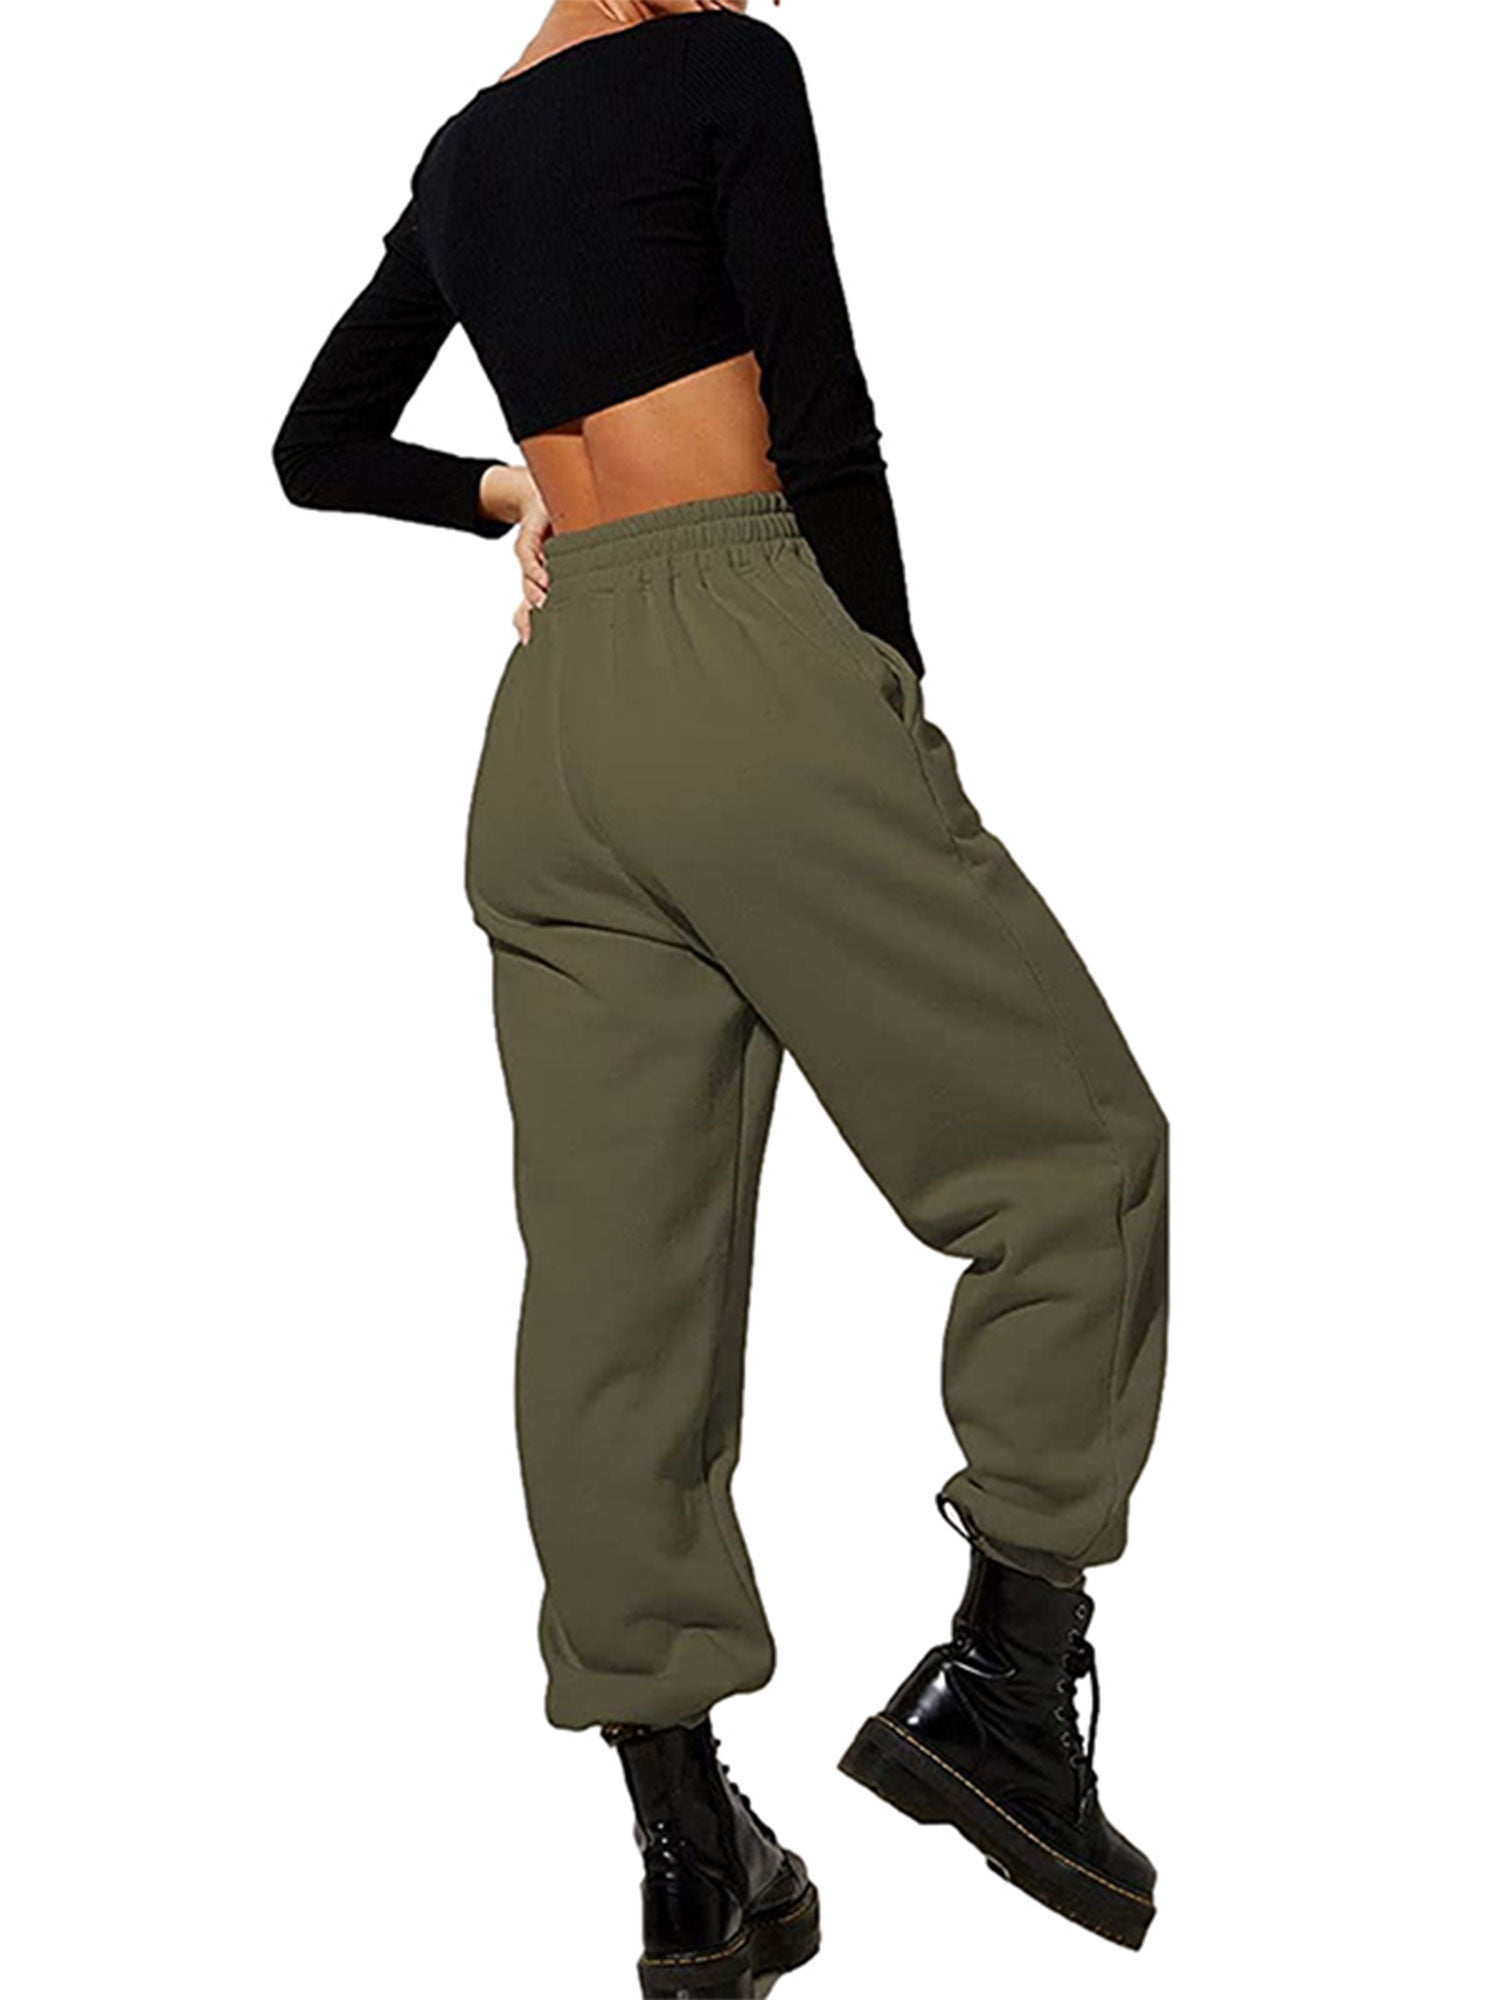 Yskkt High Waist Cargo Pants For Women Fashionable Streetwear Sweatpants  With Pocket, Slim Fit, And Elastics Cotton Trousers Women For Spring And  Autumn 210925 From Luo02, $17.93